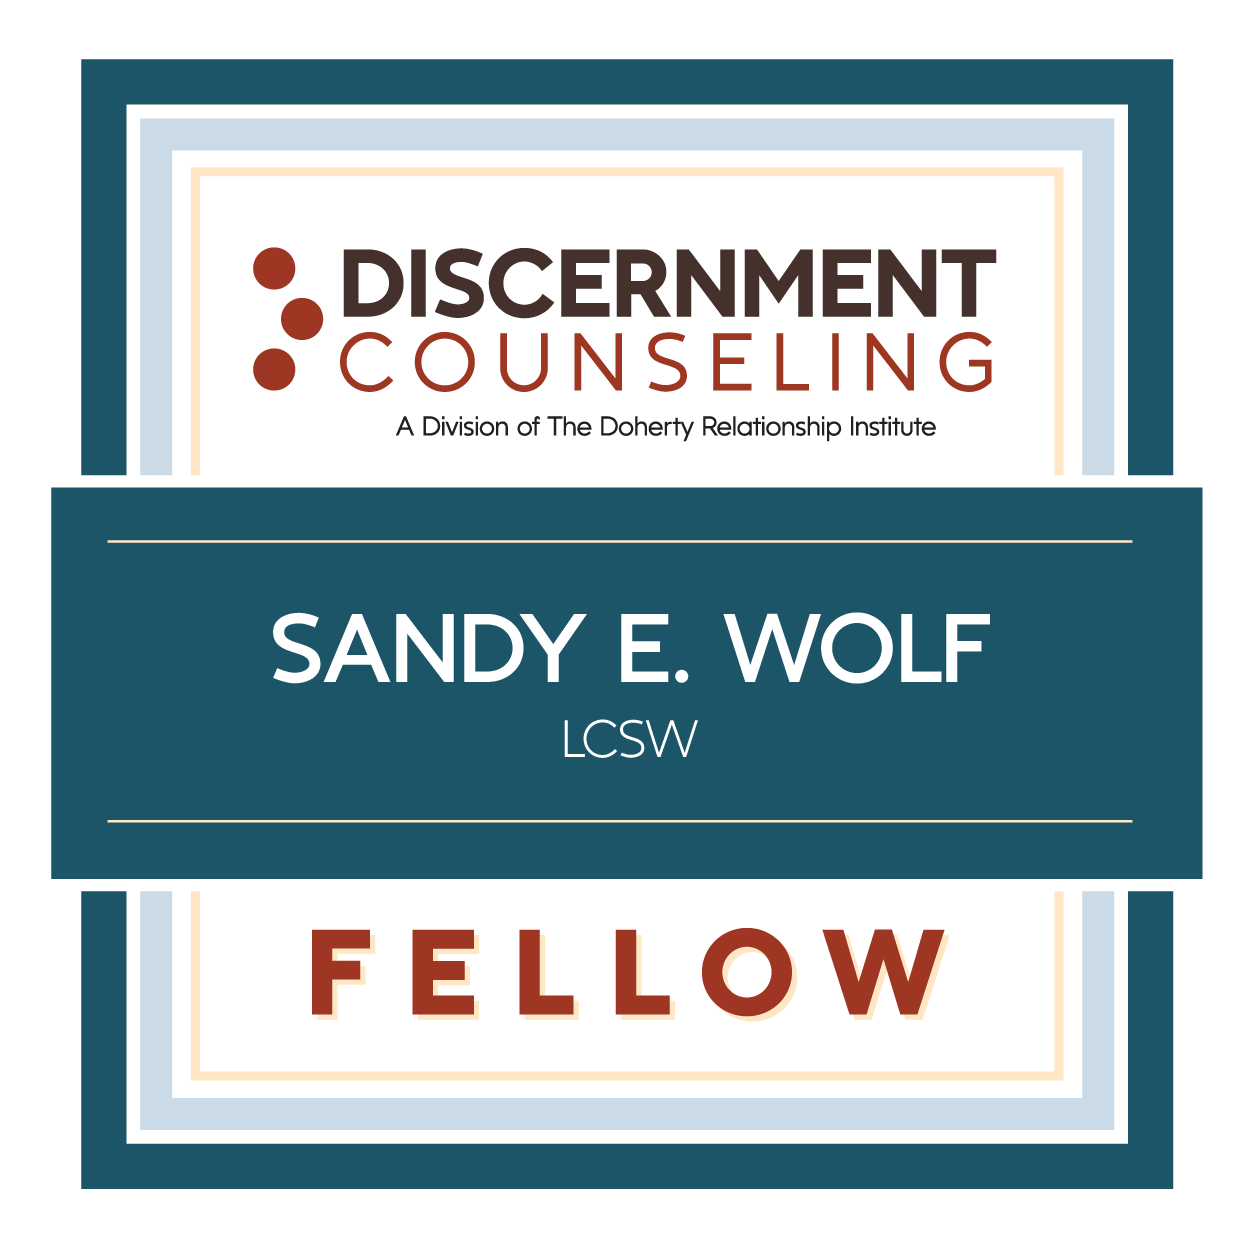 A graphic badge showing that Sandy Wolf, LCSW is a Discernment Counseling Fellow (from the Doherty Institute)